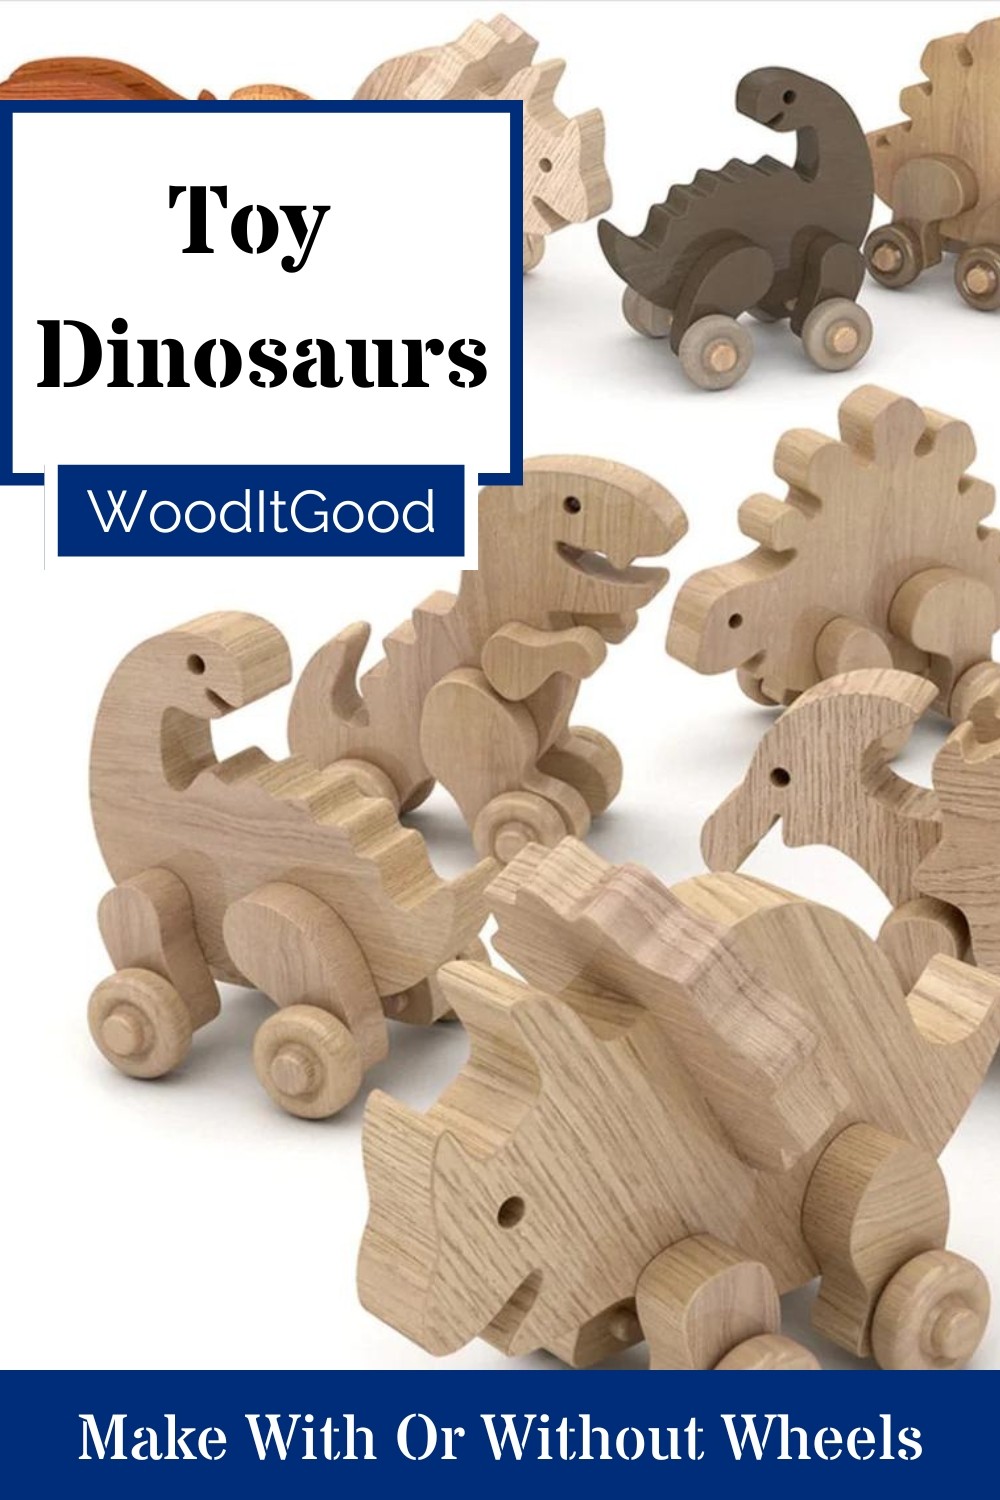 Wooden toy dino plans.